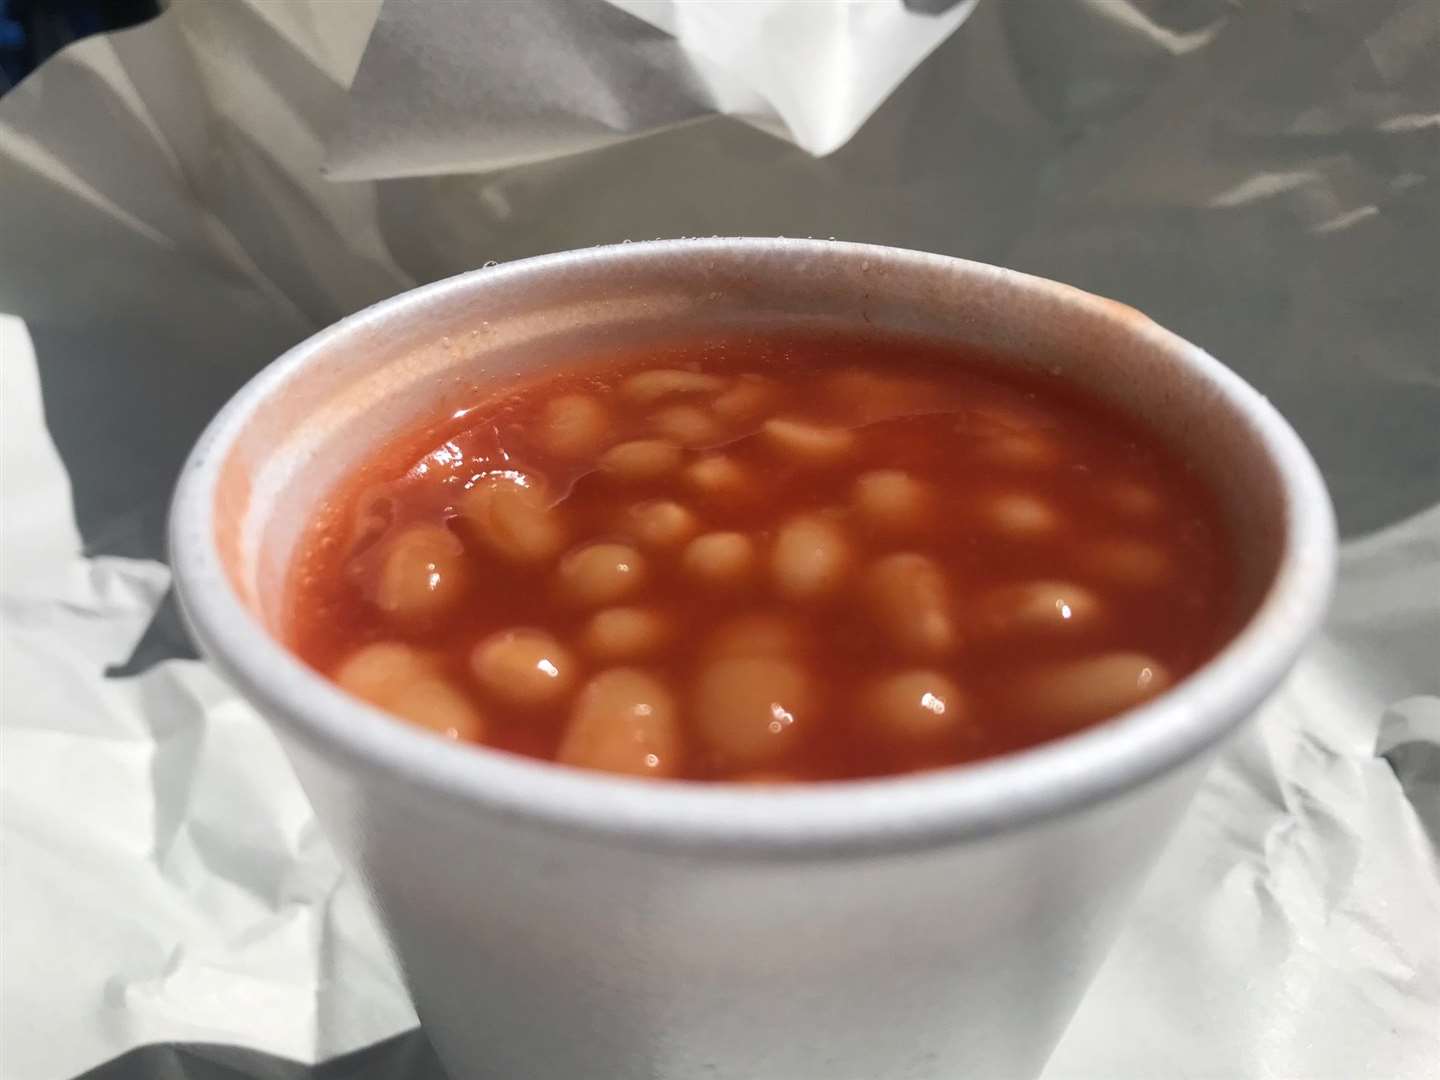 Baked beans - these are warm. They should be served cold. No ifs, no buts